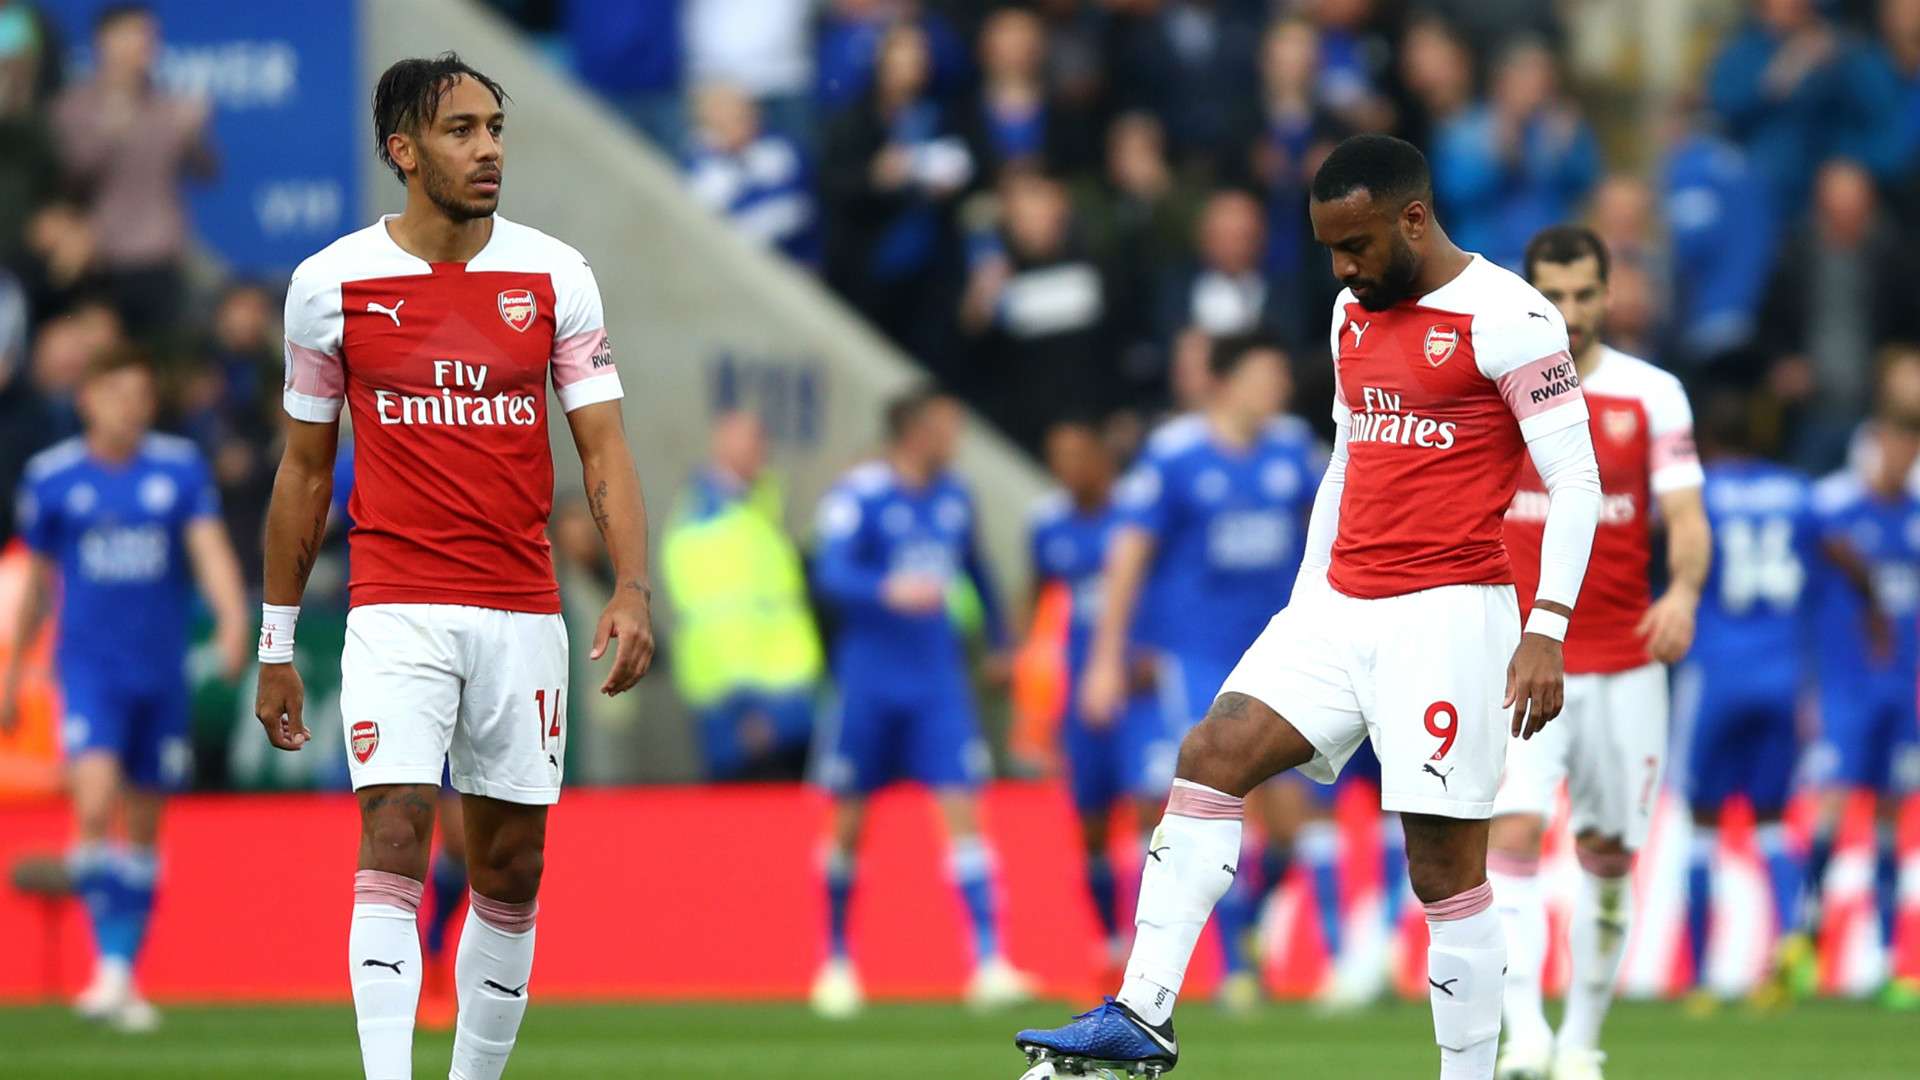 Leicester City 3-0 Arsenal: Another dent for Arsenal as top four hopes fade away | English Premier League